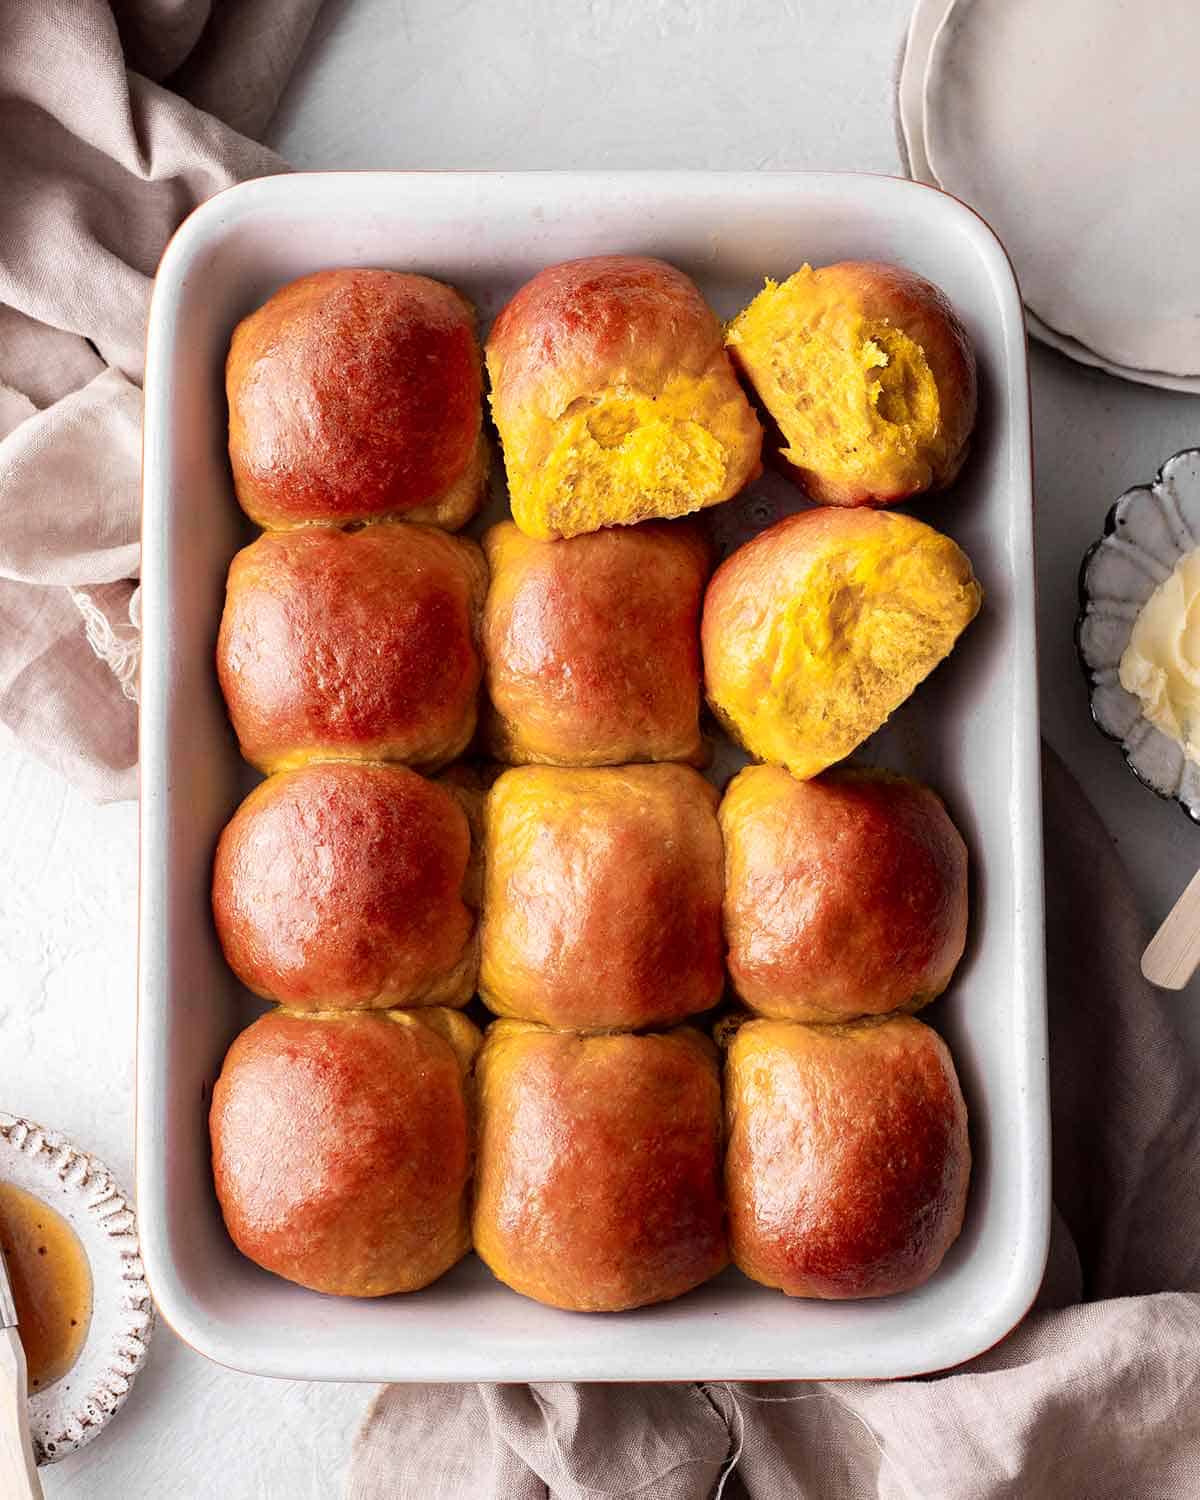 An overhead view of the vegan pumpkin dinner rolls placed on a baking tray.